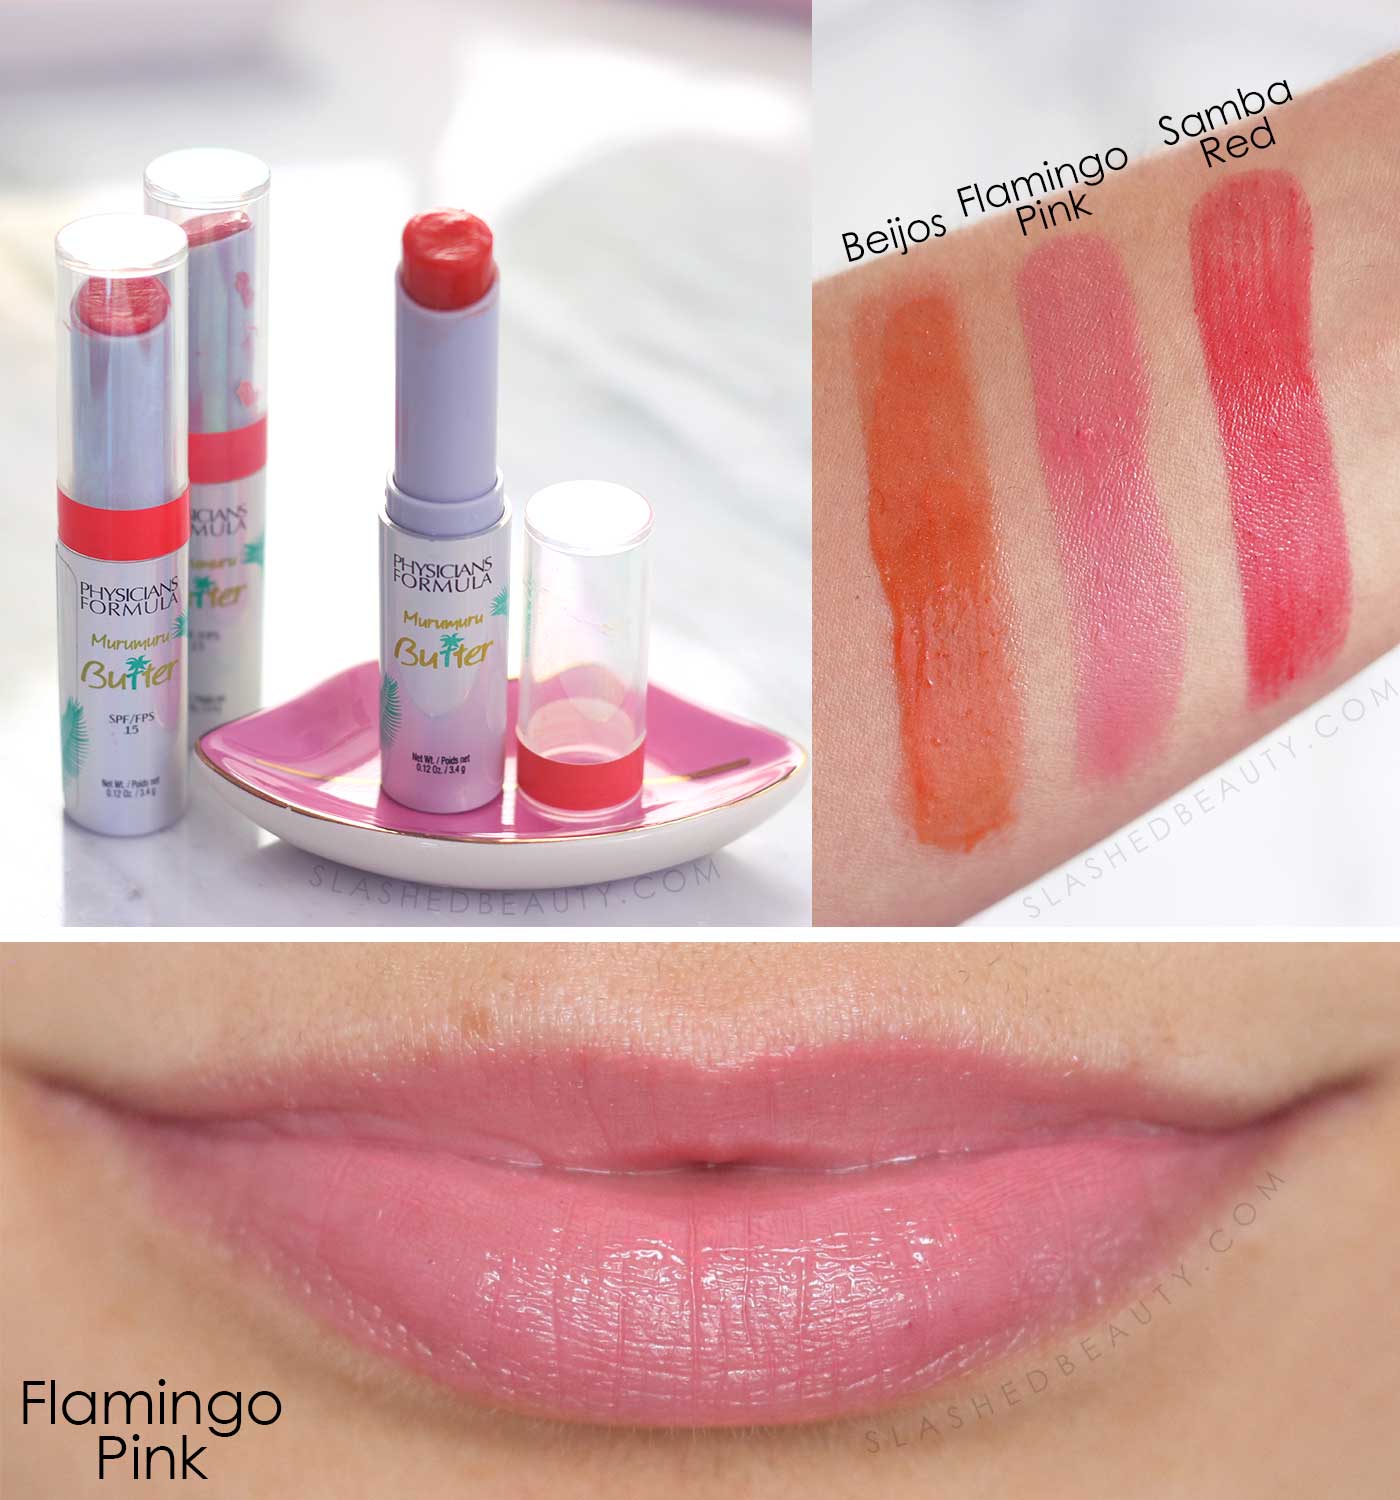 Physicians Formula Butter Lip Cream Swatches | Beijos, Flamingo Pink, Samba Red | 5 Best Drugstore Tinted Lip Balms | Slashed Beauty